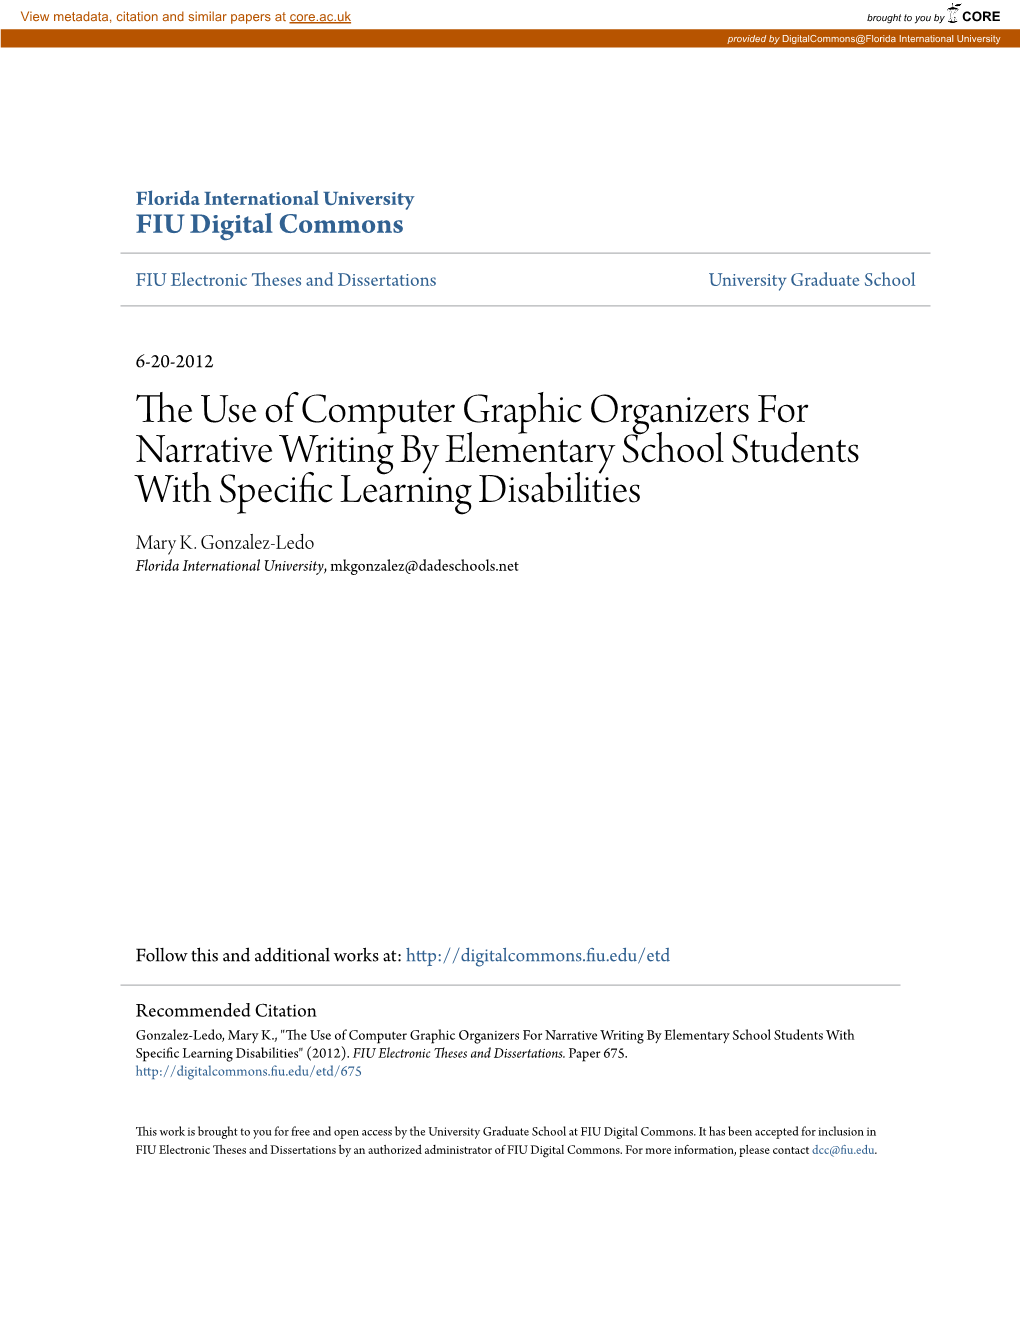 The Use of Computer Graphic Organizers for Narrative Writing By